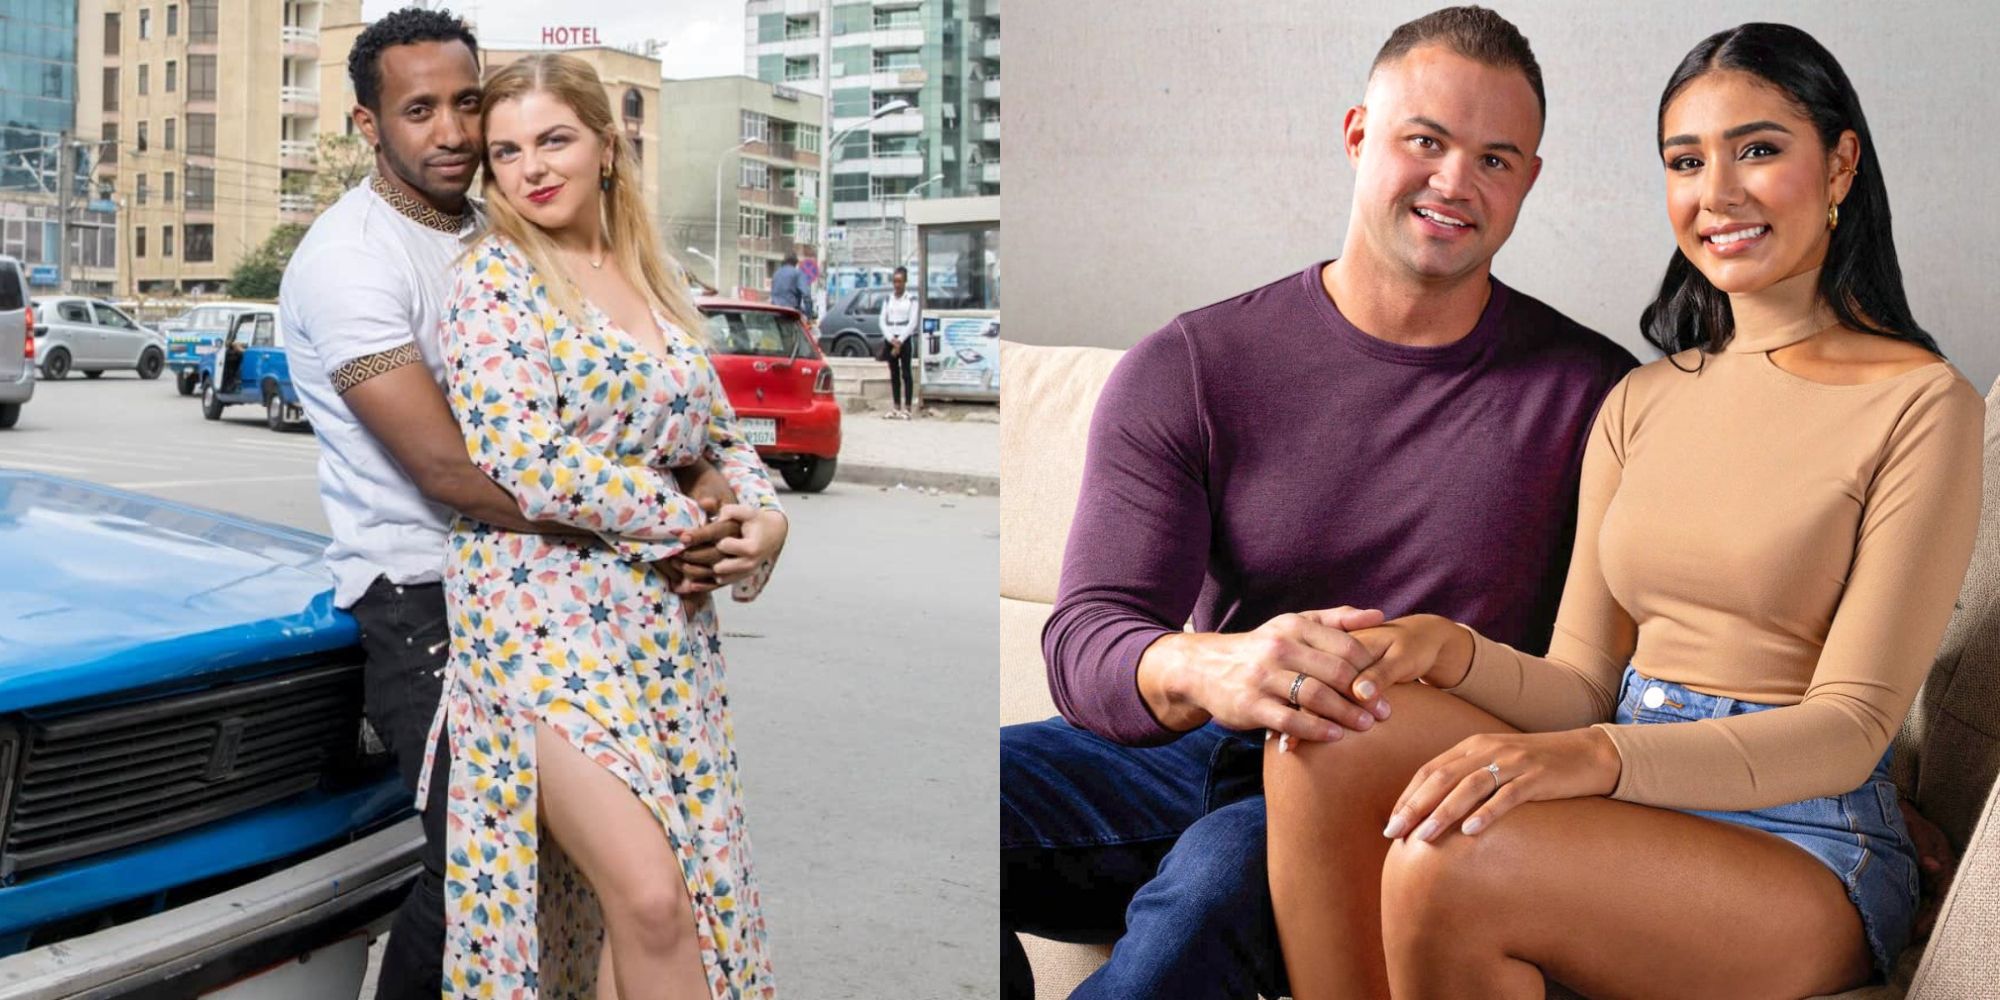 Split image showing Ari and Bini & Patrick and Thais in 90 Day Fiancé.